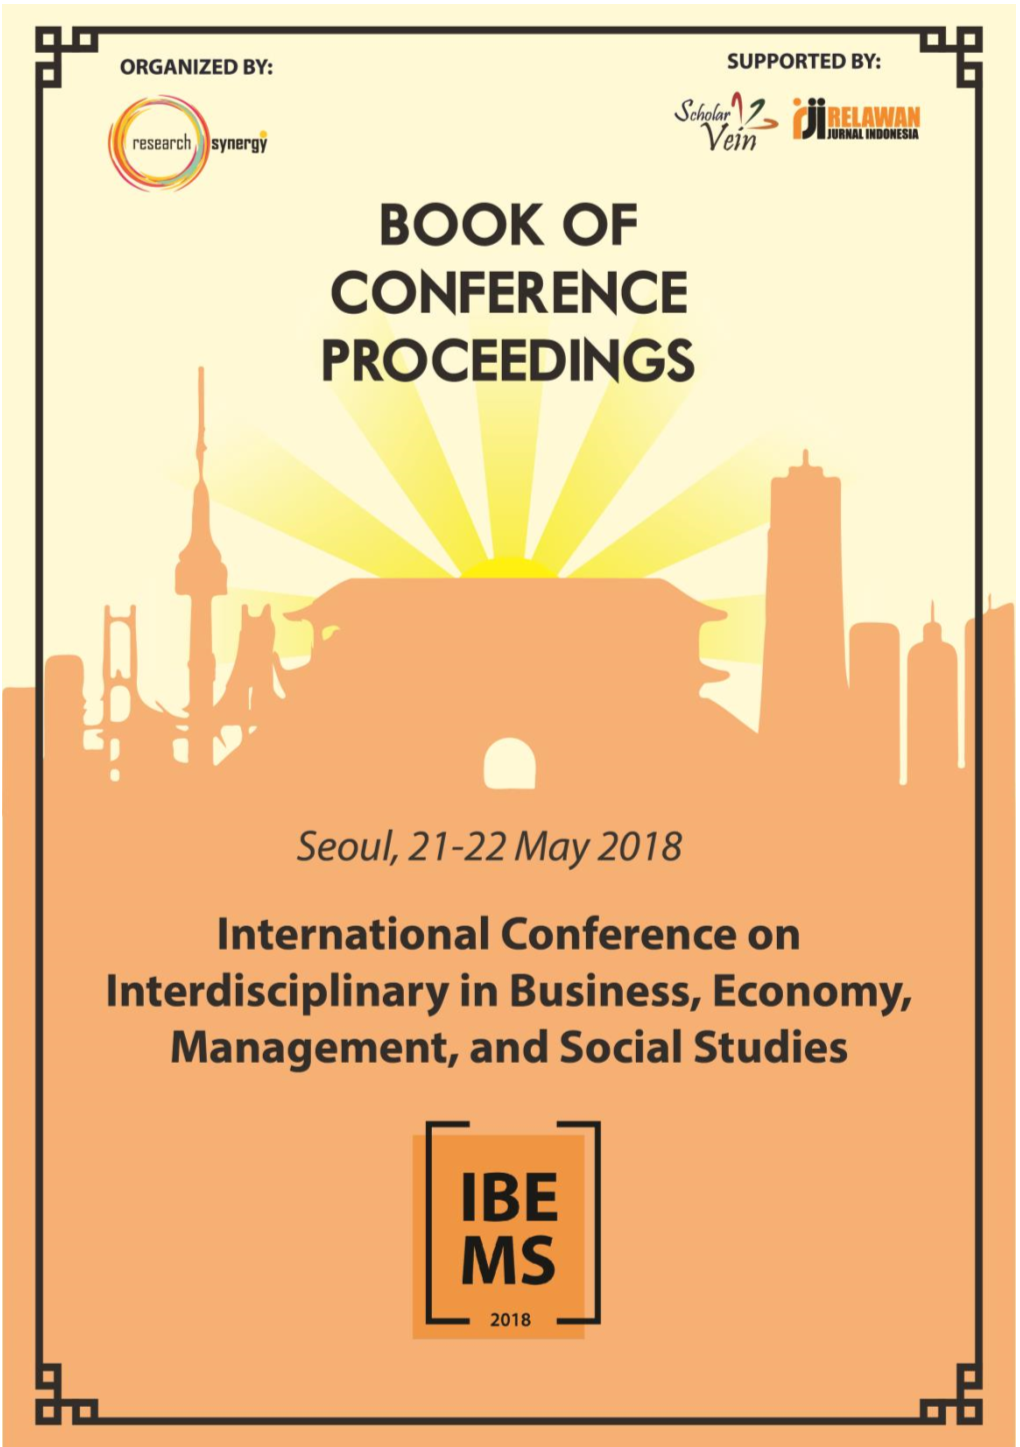 Conference-Book-IBEMS 2.Pdf